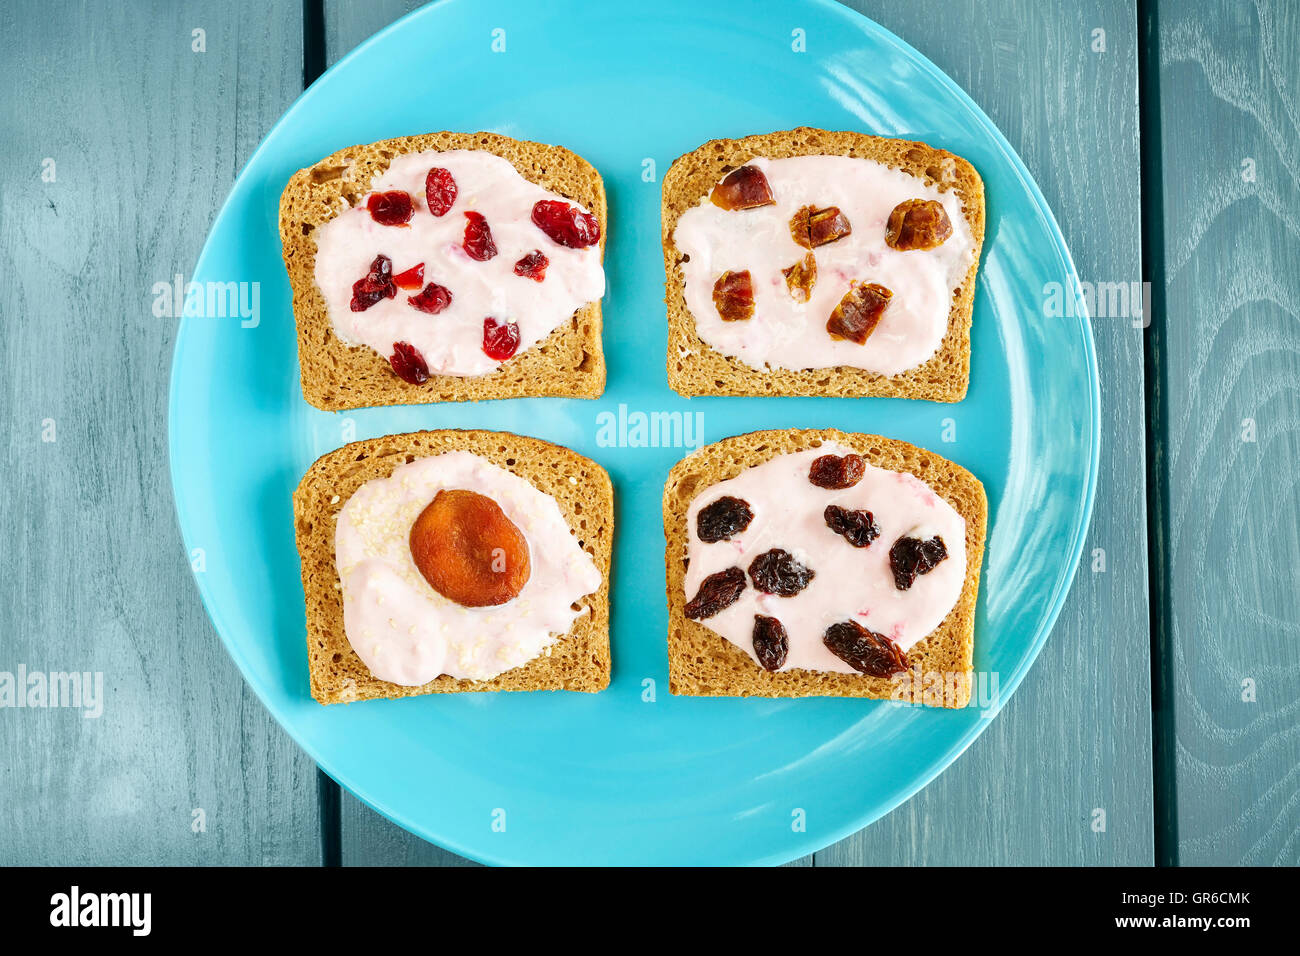 Bread with strawberry cream cheese and dry fruits on blue plate, healthy breakfast setting from above. Stock Photo